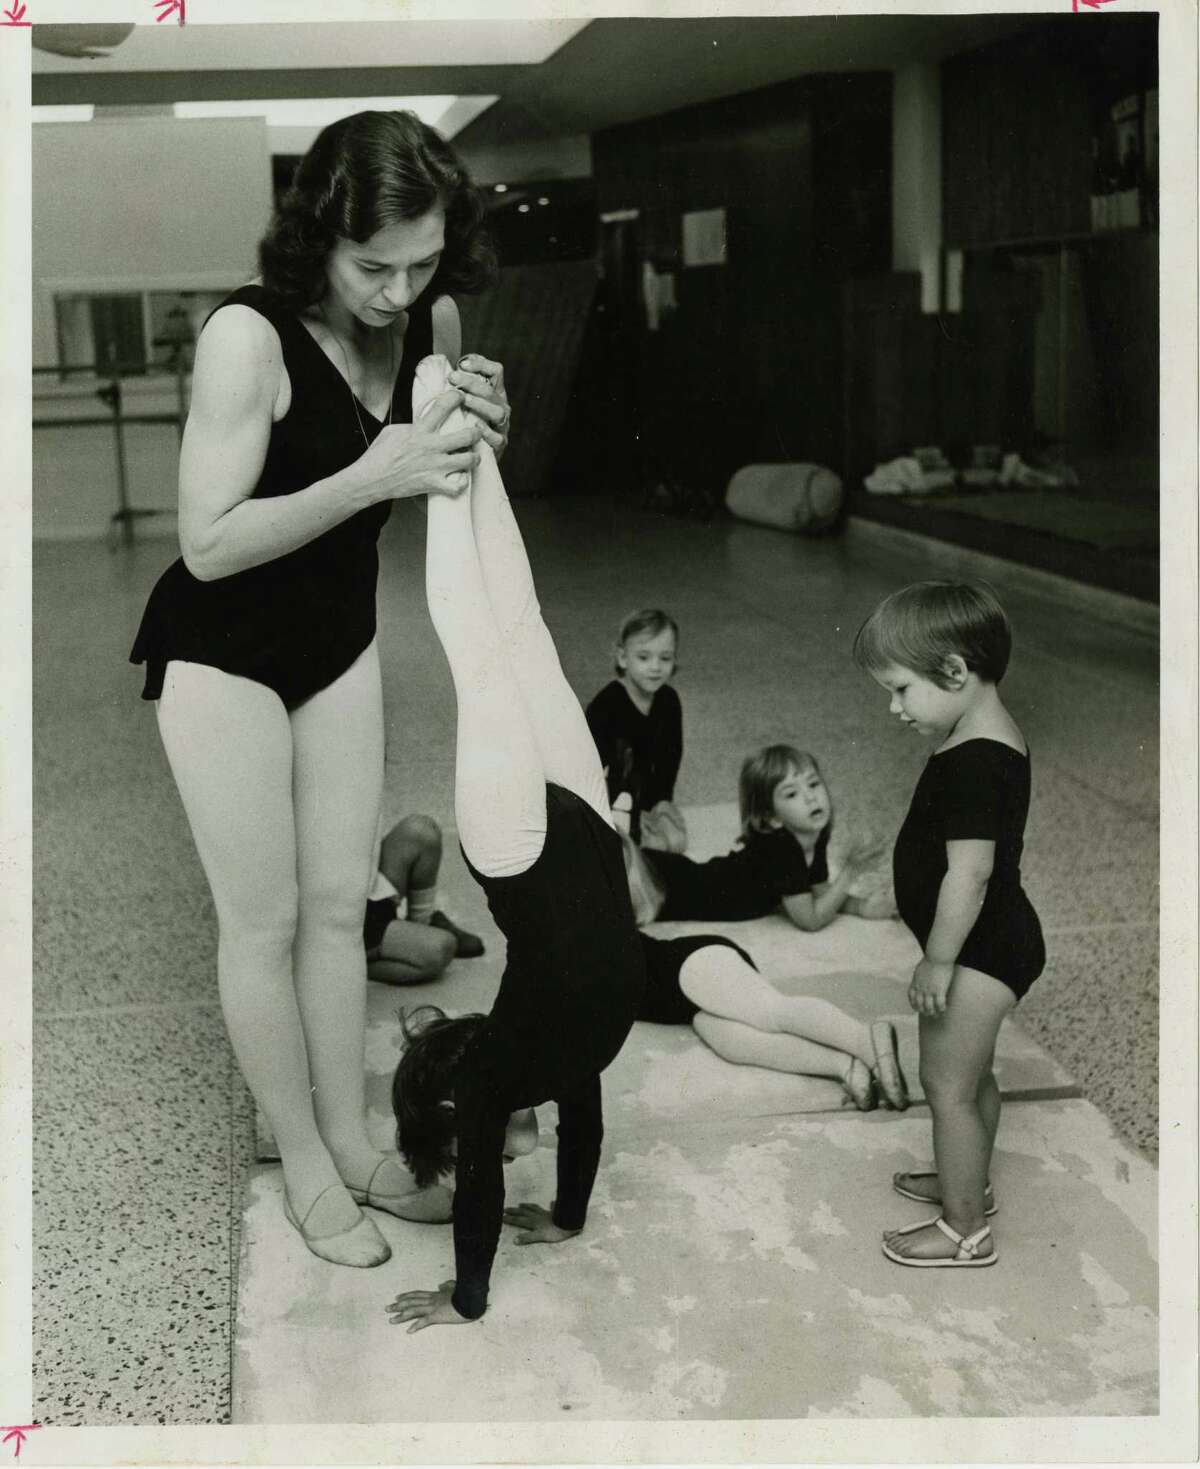 Patsy Swayze teaches a class of young students in 1966.